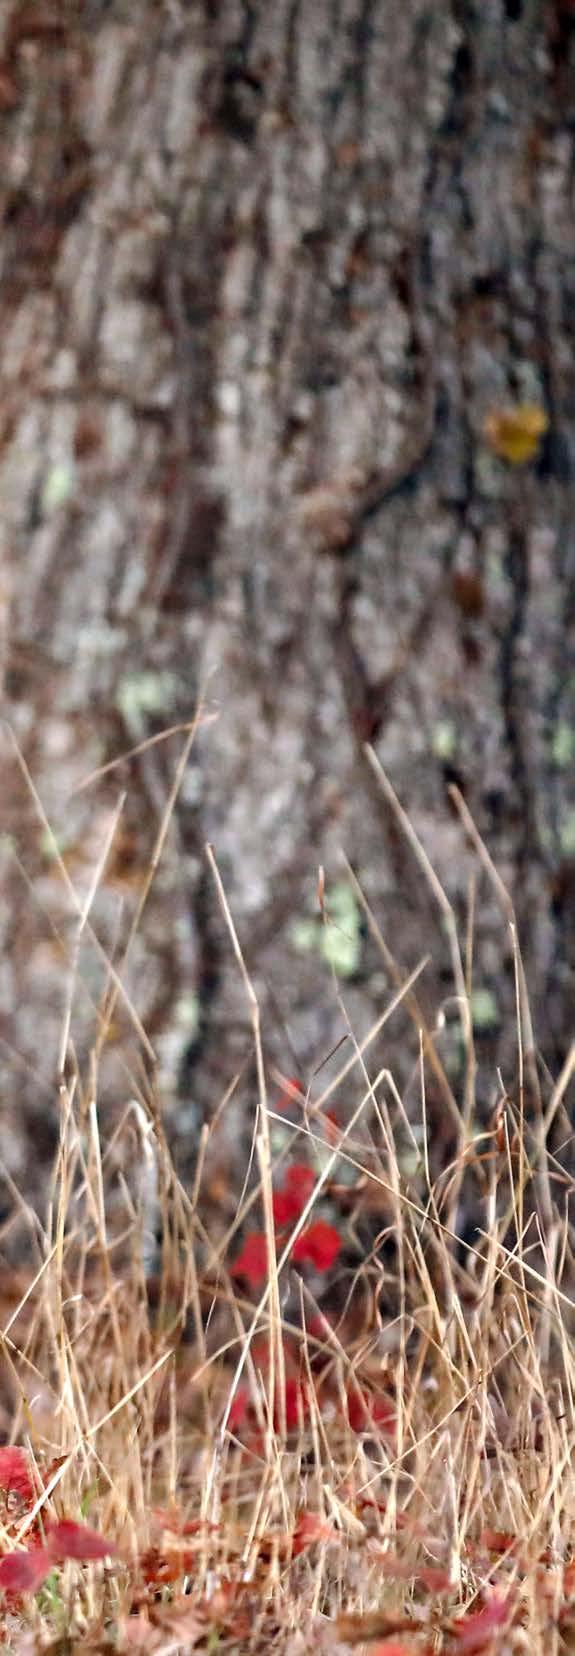 A LONGTIME HUNTER AND CONSERVATION OFFICER GIVES ADVICE ON DEER HUNTING IN NEW HAMPSHIRE by JOHN WIMSATT will admit it, writing a deer scouting and hunting article is a first for me.